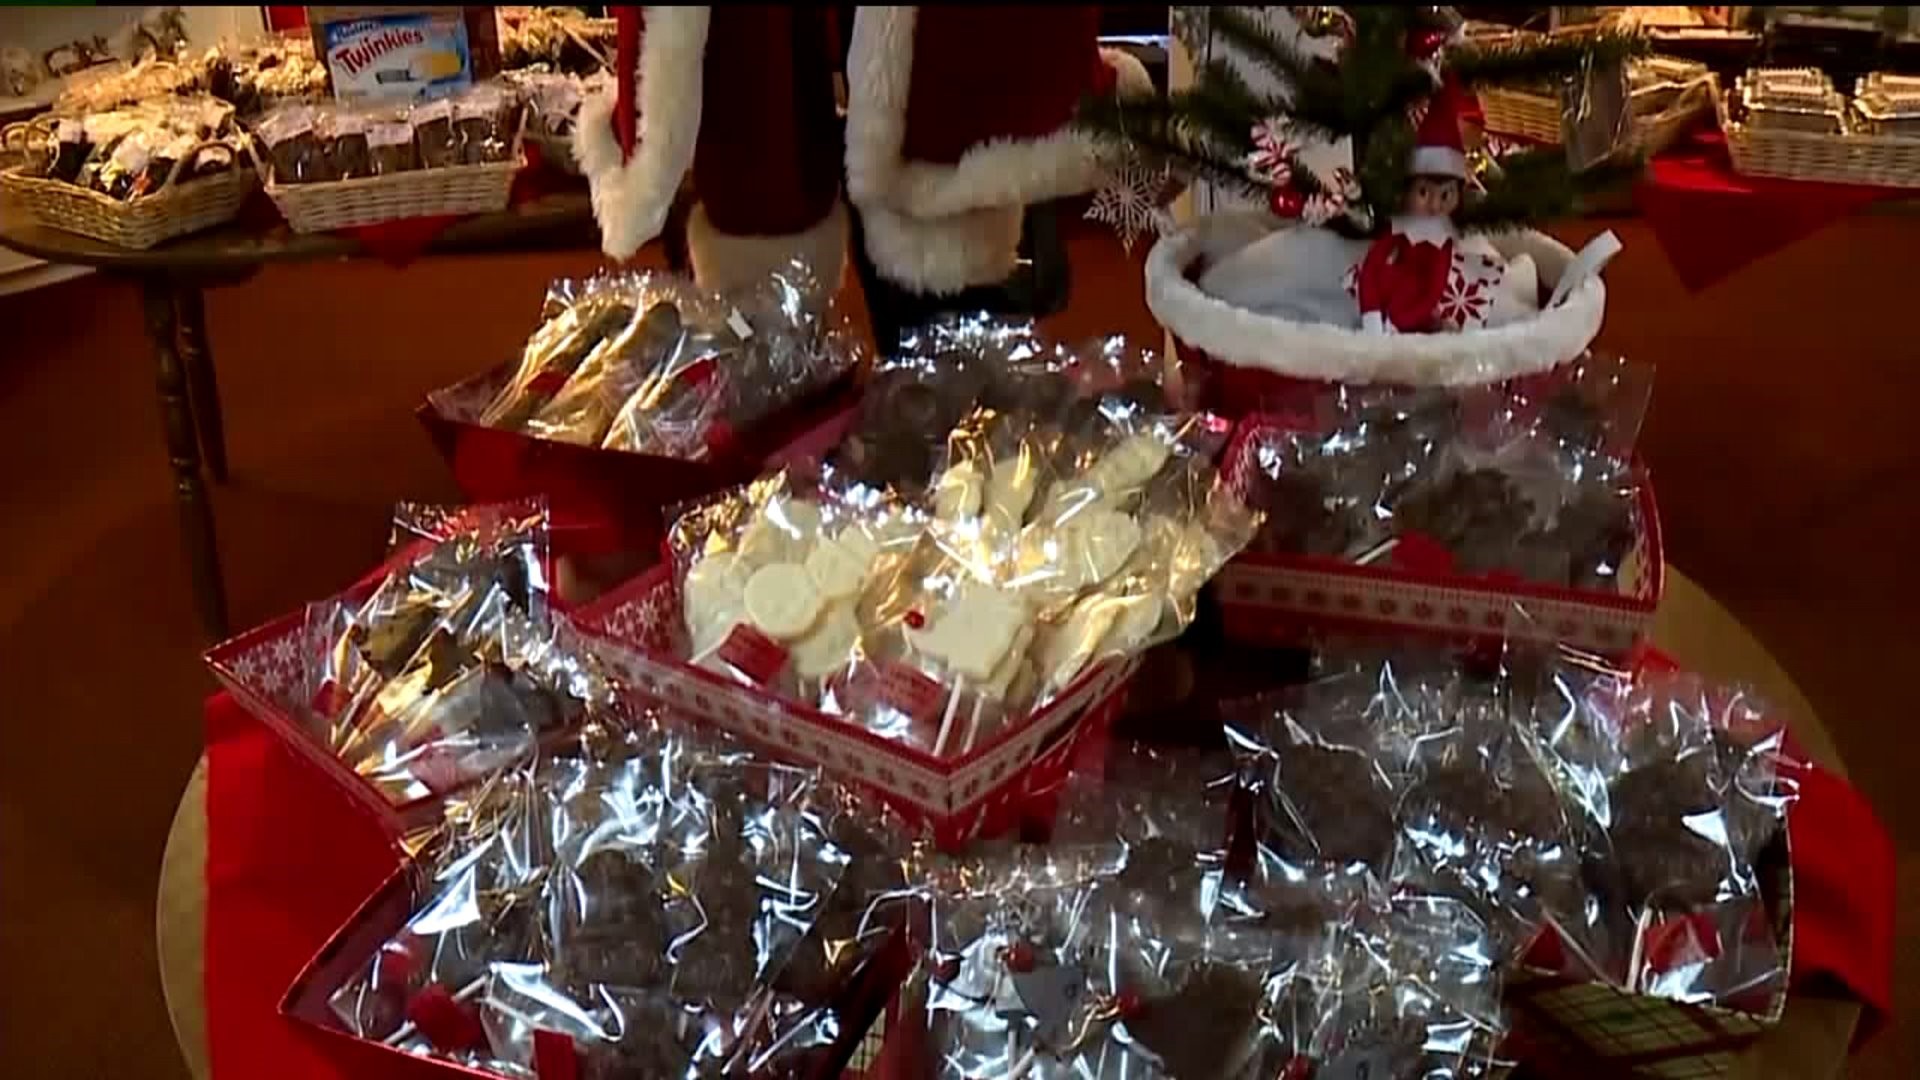 Callie's Candy Kitchen Ready for Holiday Rush